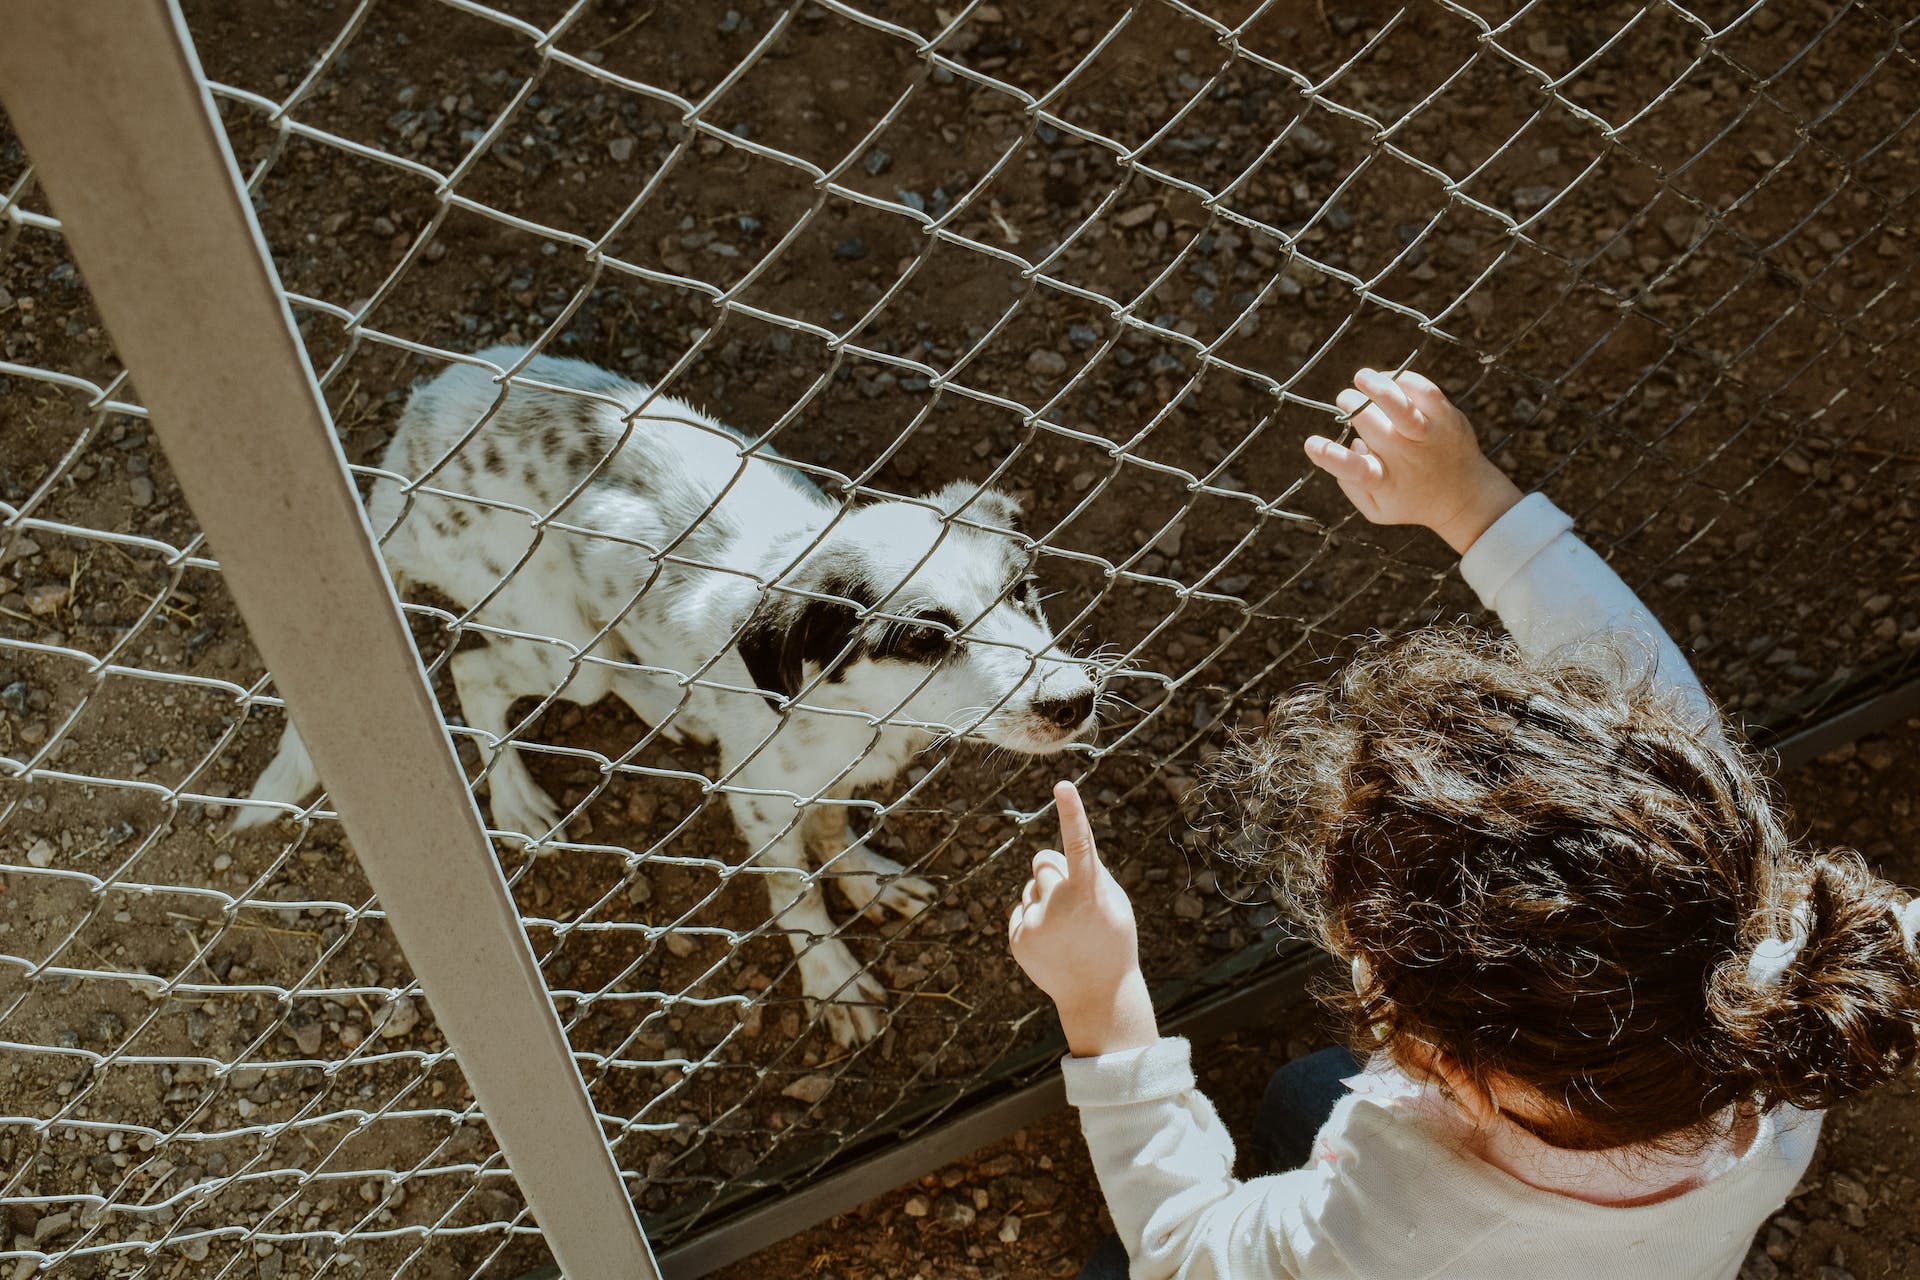 A dog looking at a little girl through a fence